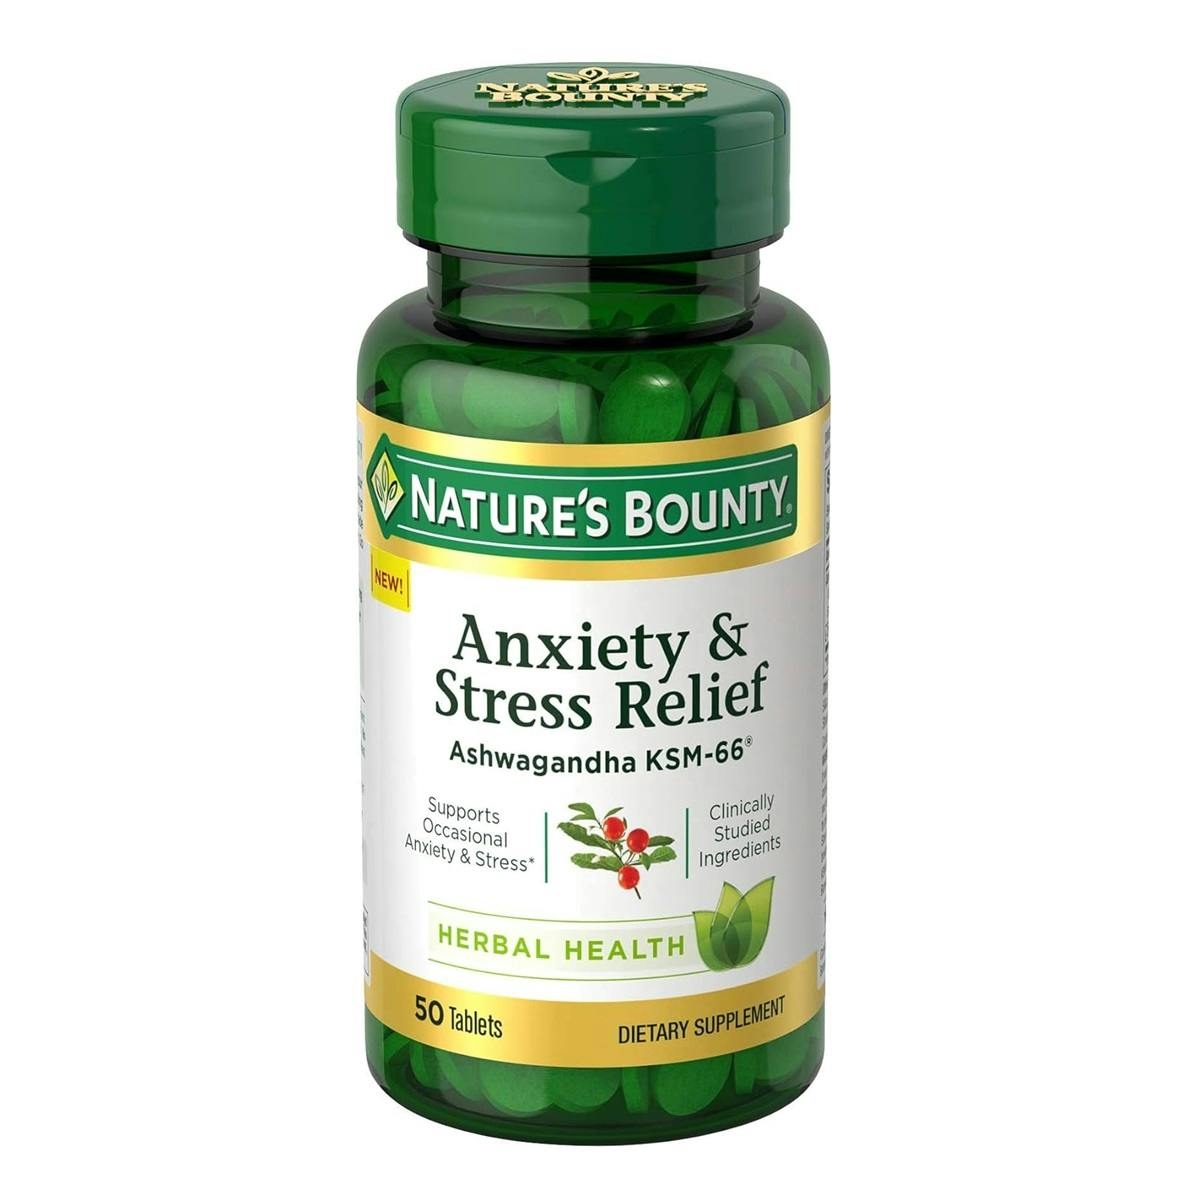 Nature’s Bounty Anxiety & Stress Relief Supplement, Ashwagandha KSM-66